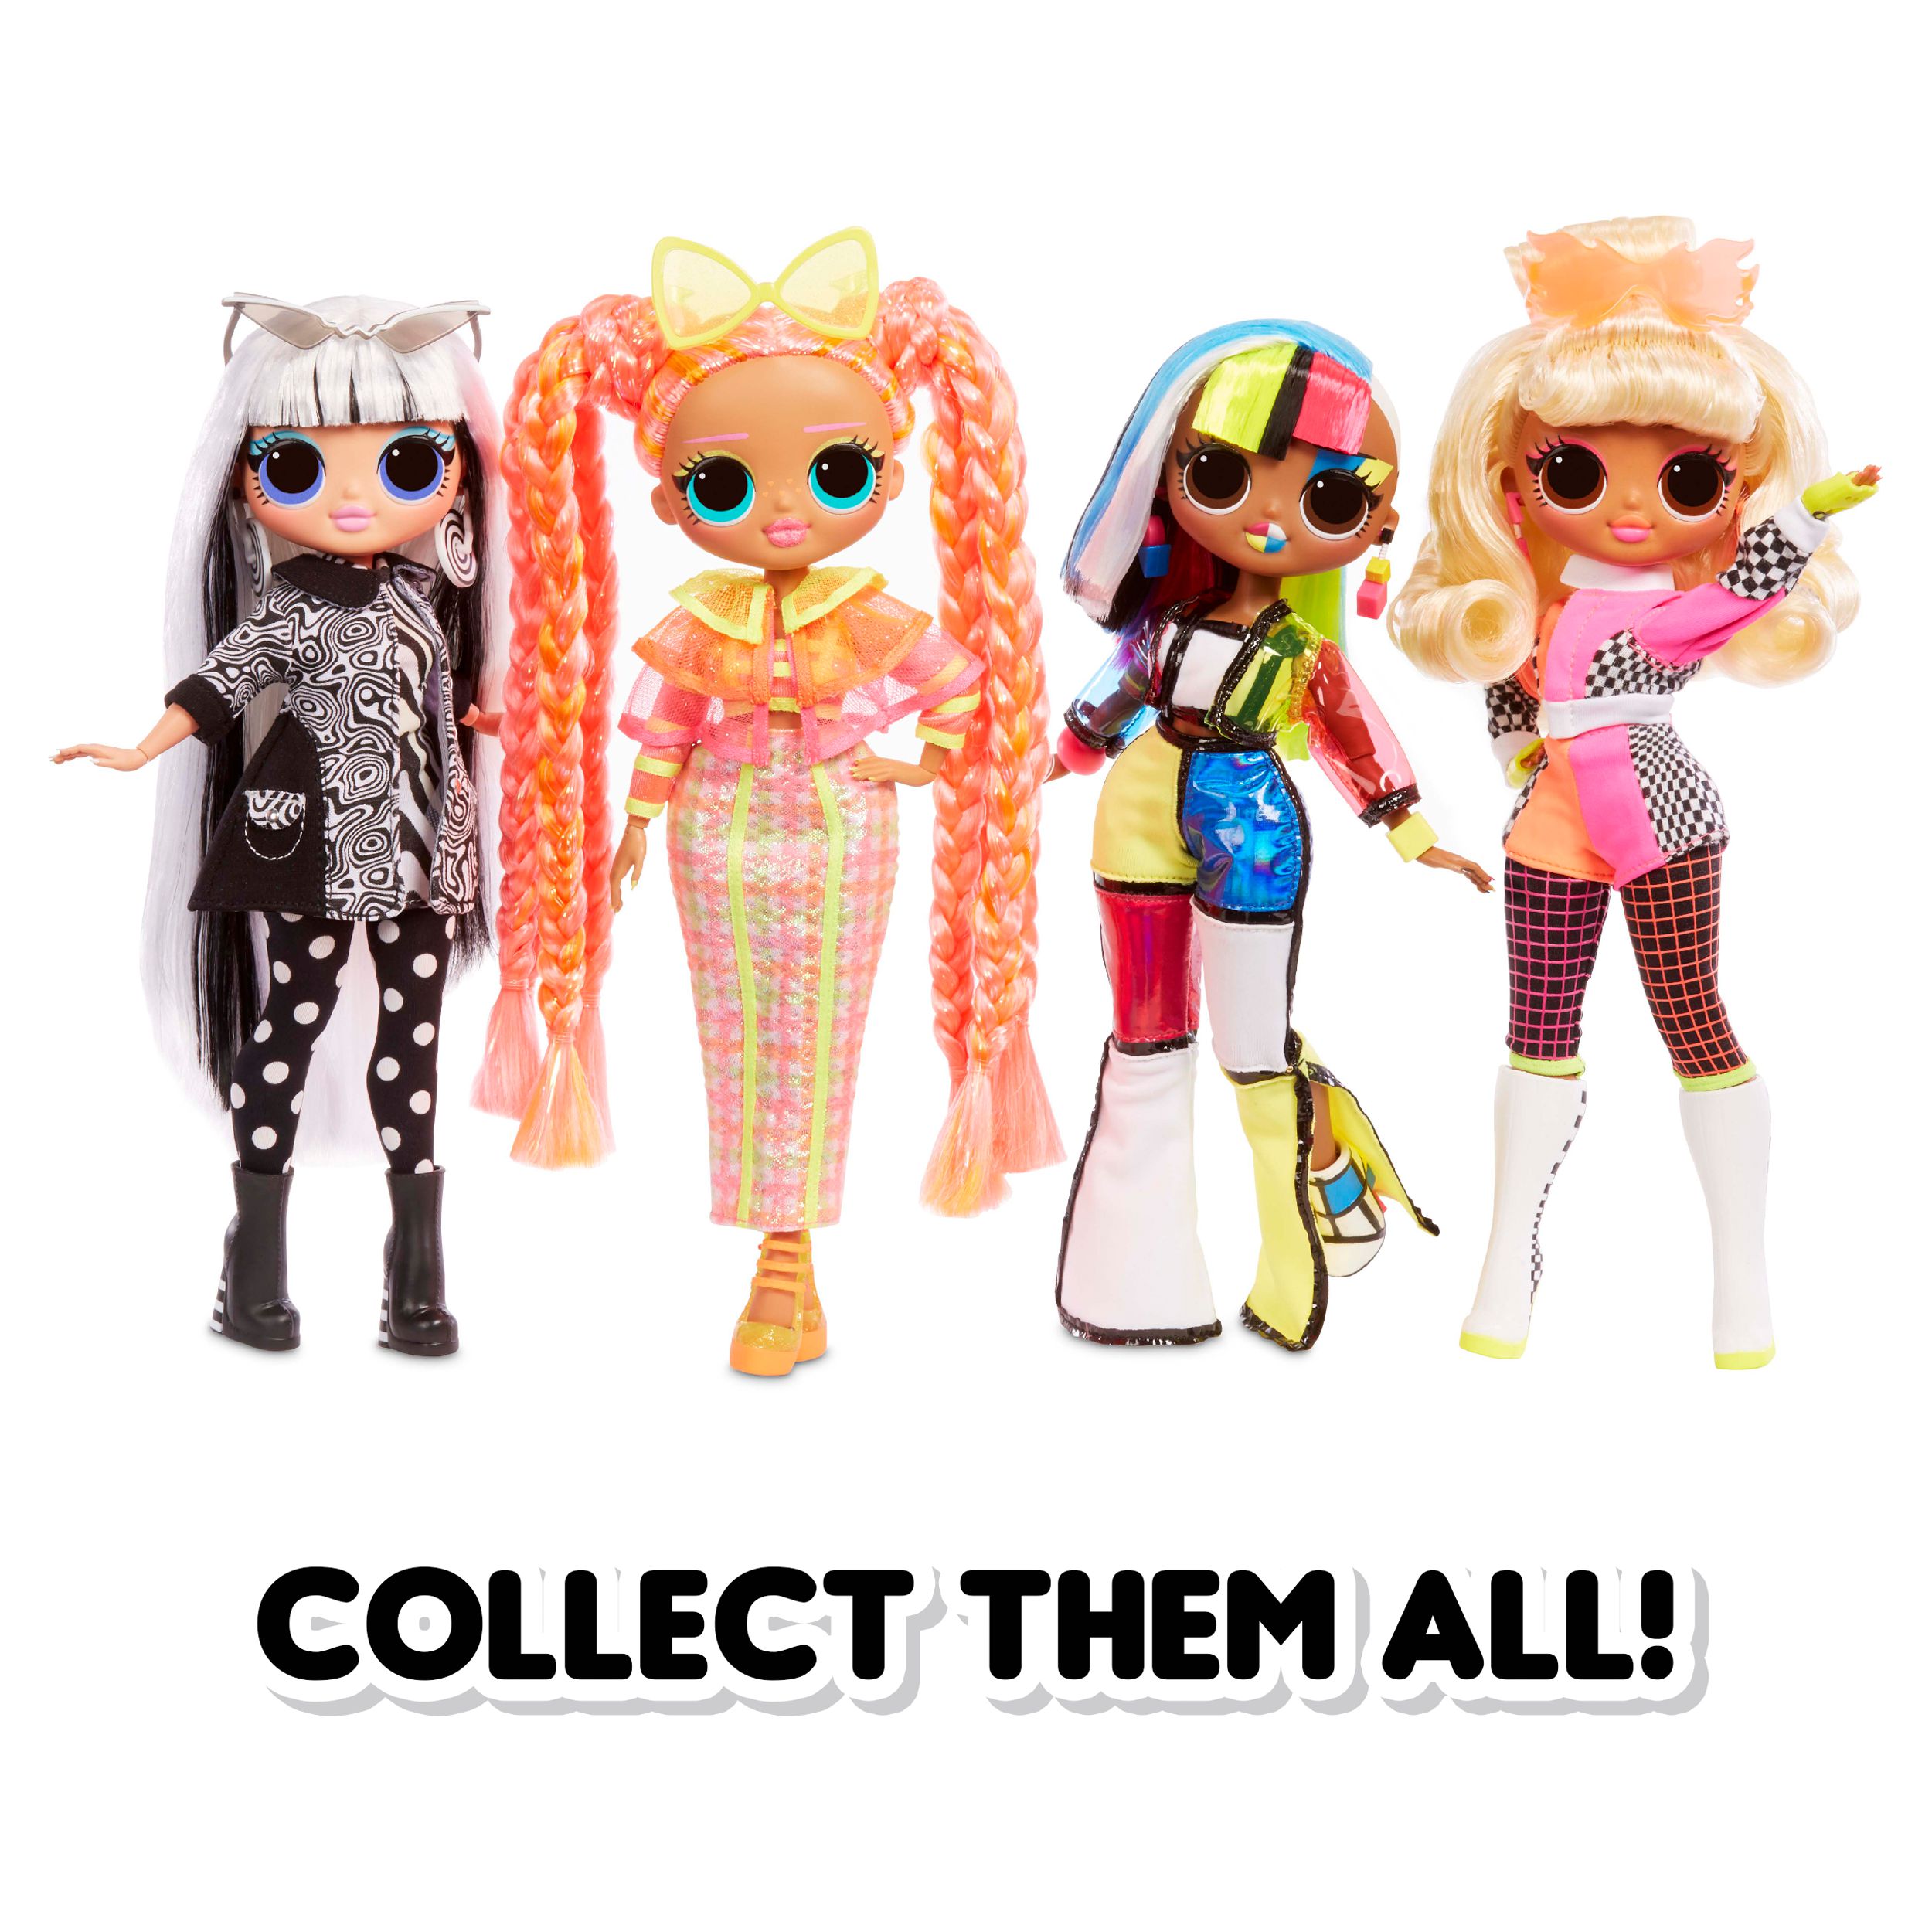 LOL Surprise OMG Lights Speedster Fashion Doll With 15 Surprises, Great Gift for Kids Ages 4 5 6+ - image 7 of 7